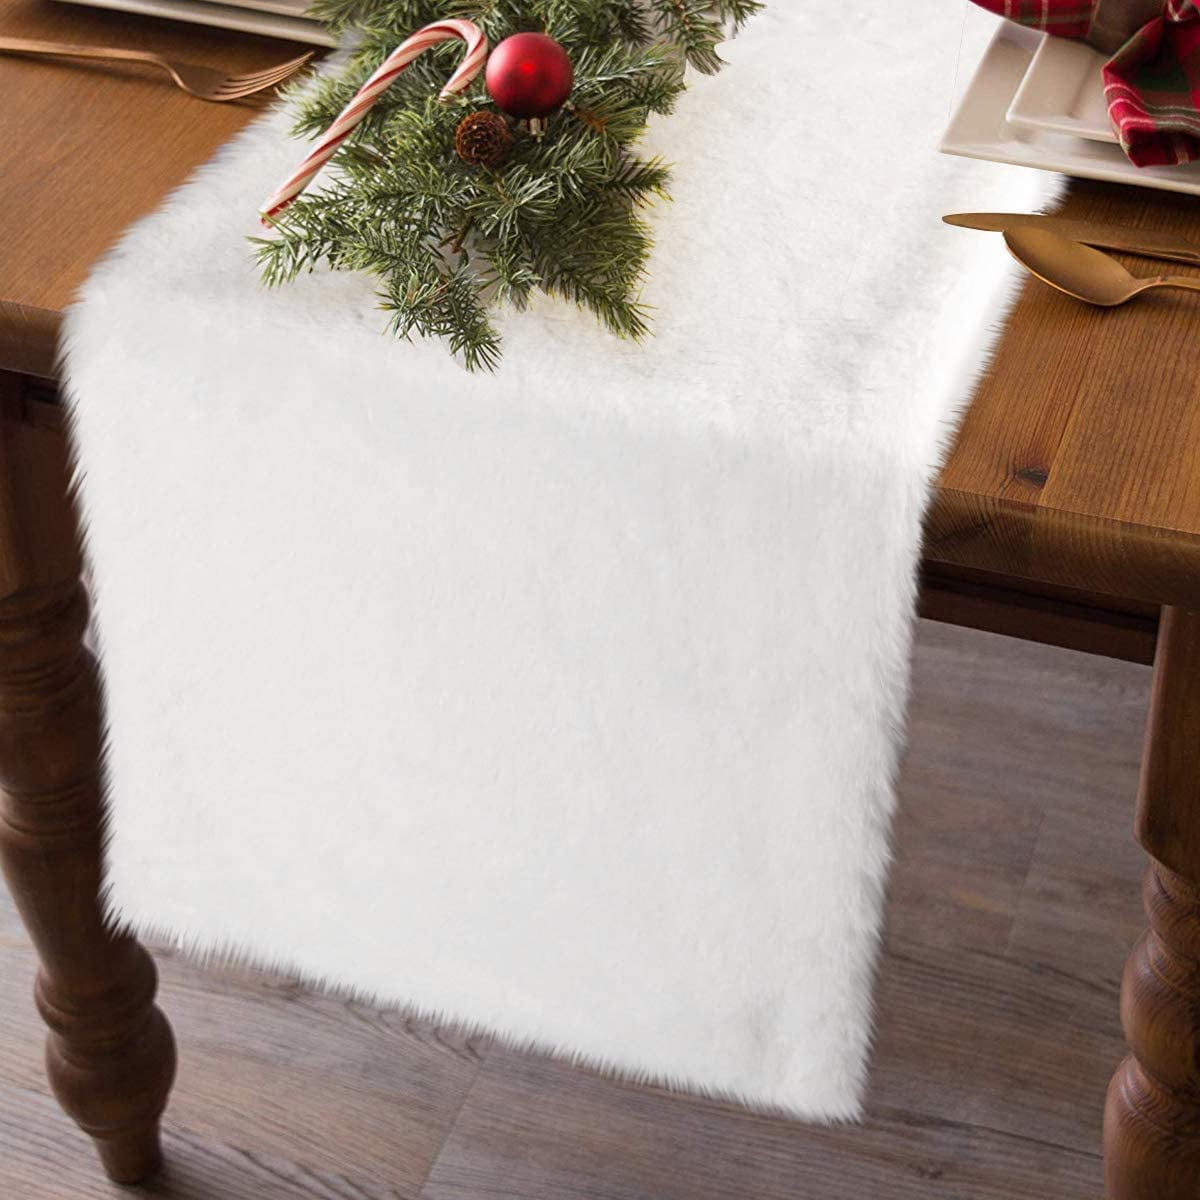 yuboo White Christmas Table Runner,15 x 108 Inches Faux Fur Party Decoration for Bed/Cabinet/Dinning Table/Shelf Decorations